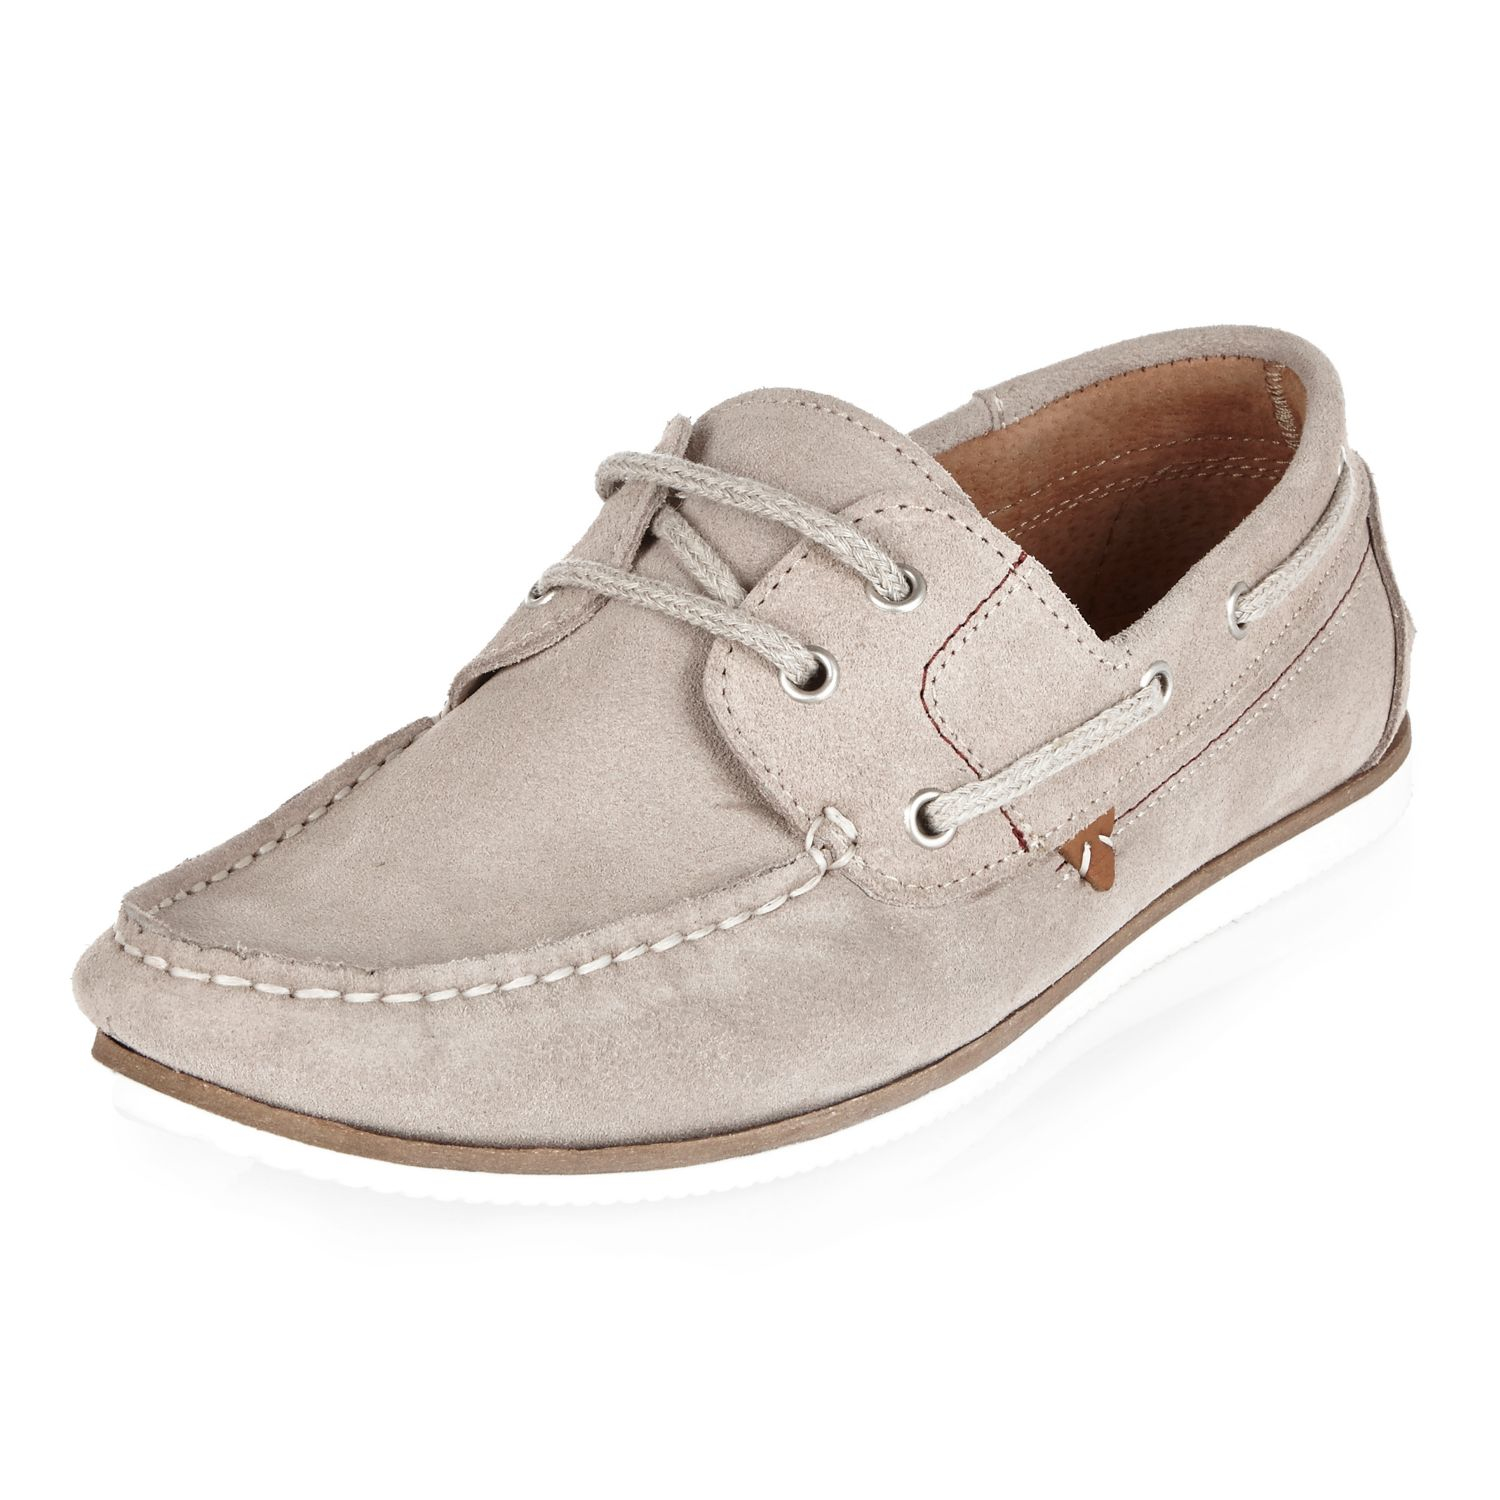 River Island Grey Suede Boat Shoes in Gray for Men Lyst